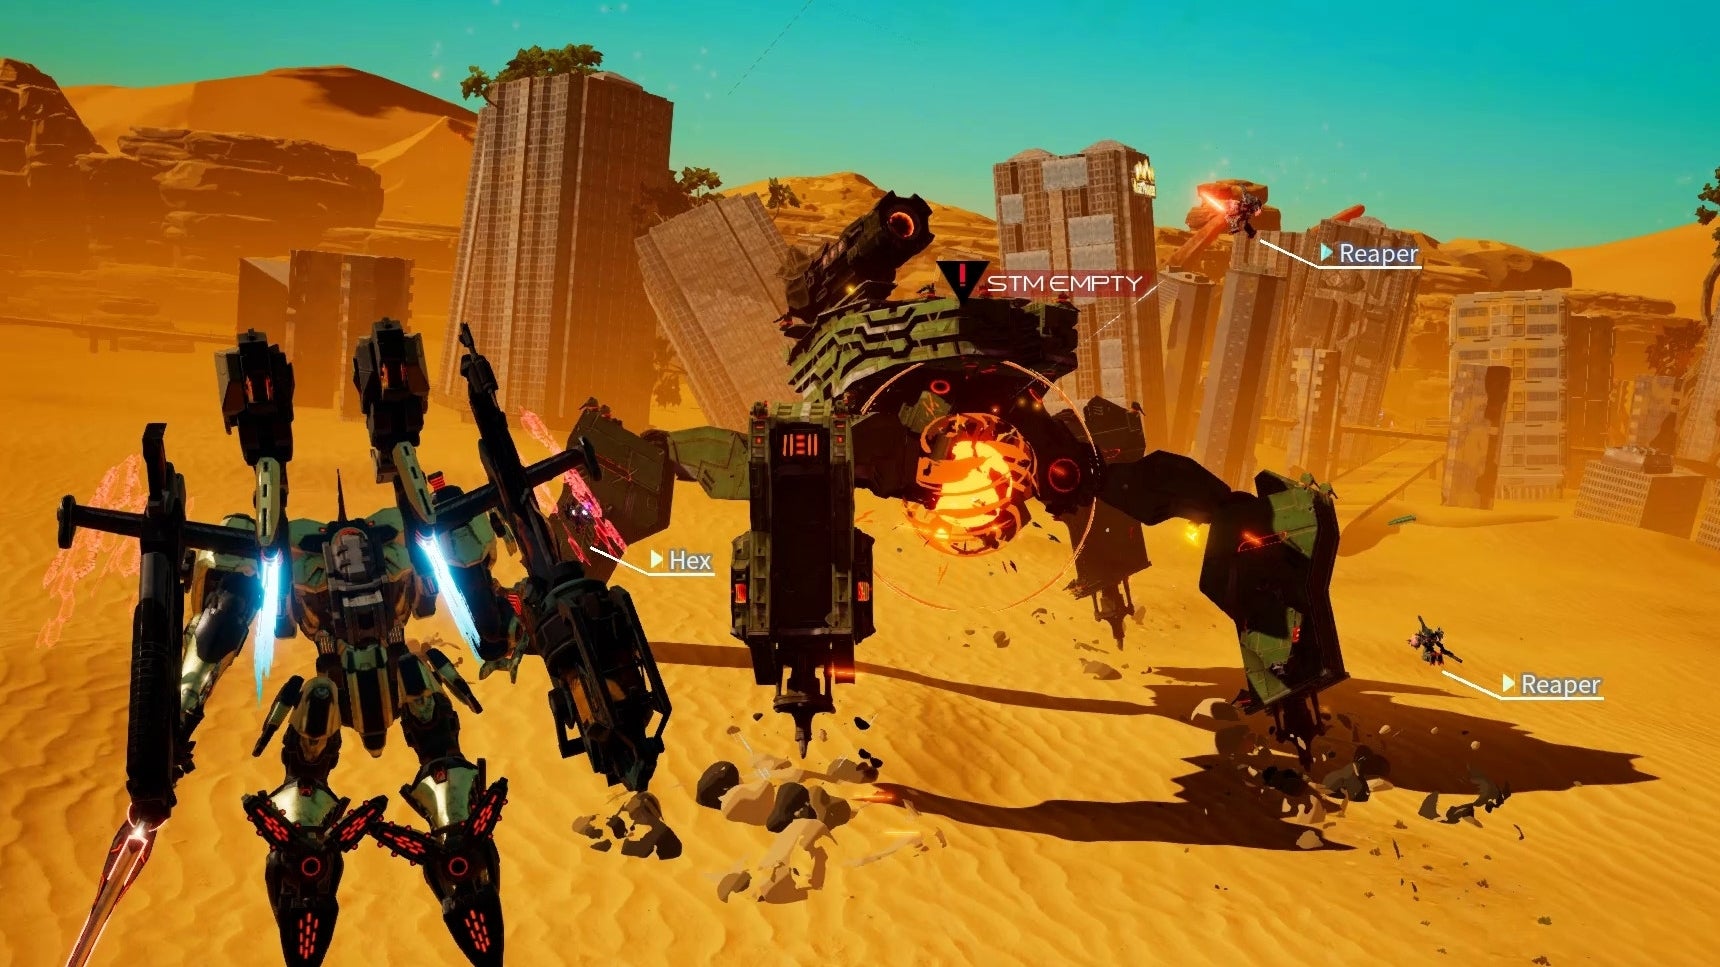 Image for Switch mech shooter Daemon X Machina is heading to PC next week